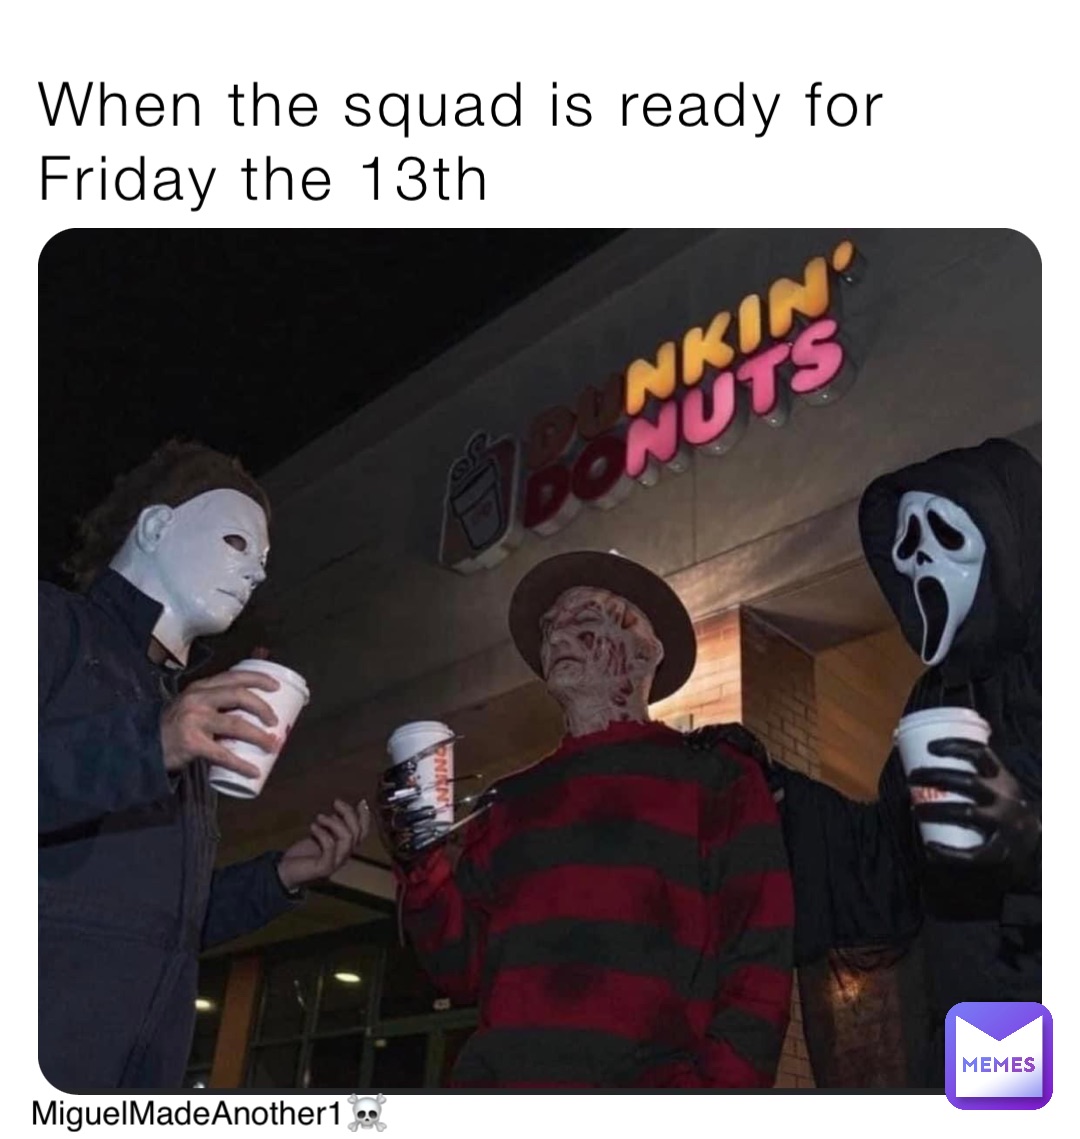 When the squad is ready for Friday the 13th MiguelMadeAnother1☠️